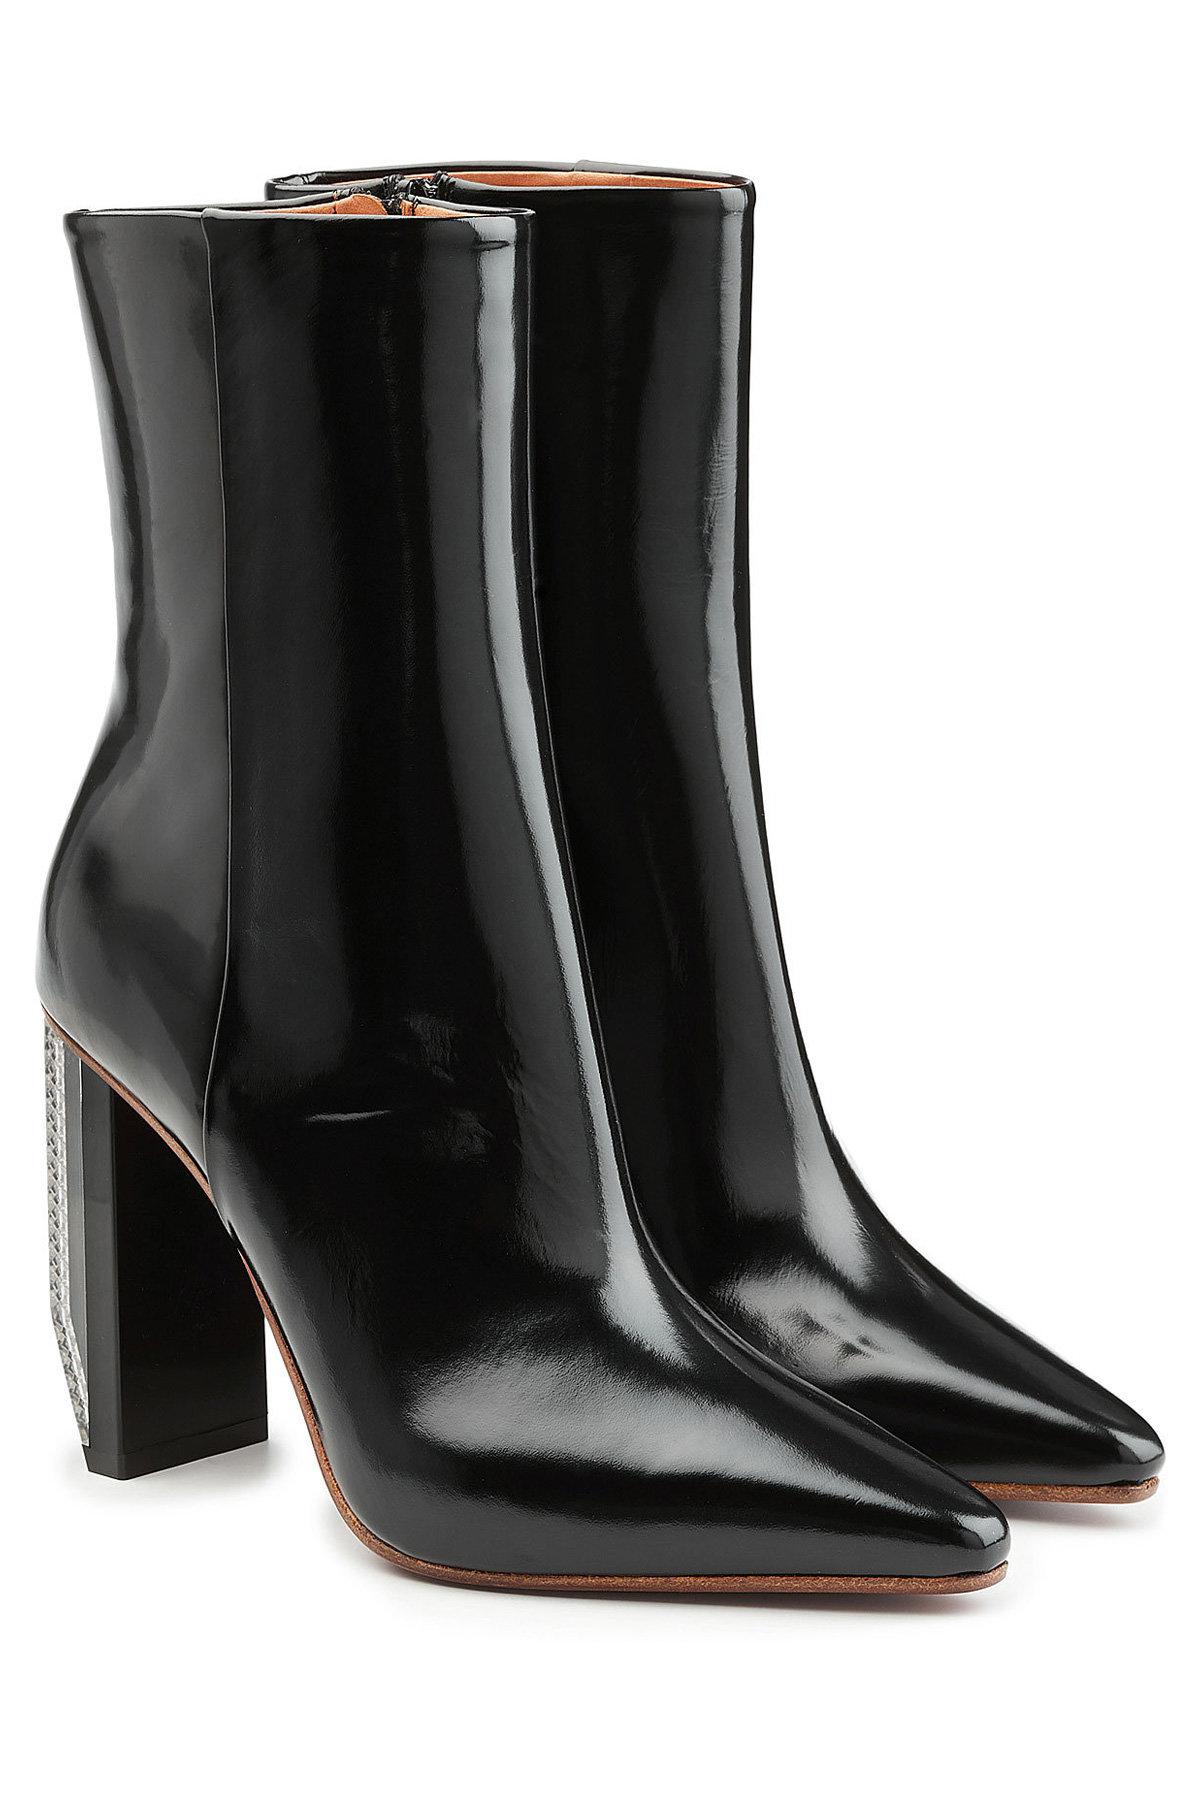 Lyst - Vetements Patent Leather Ankle Boots in Black